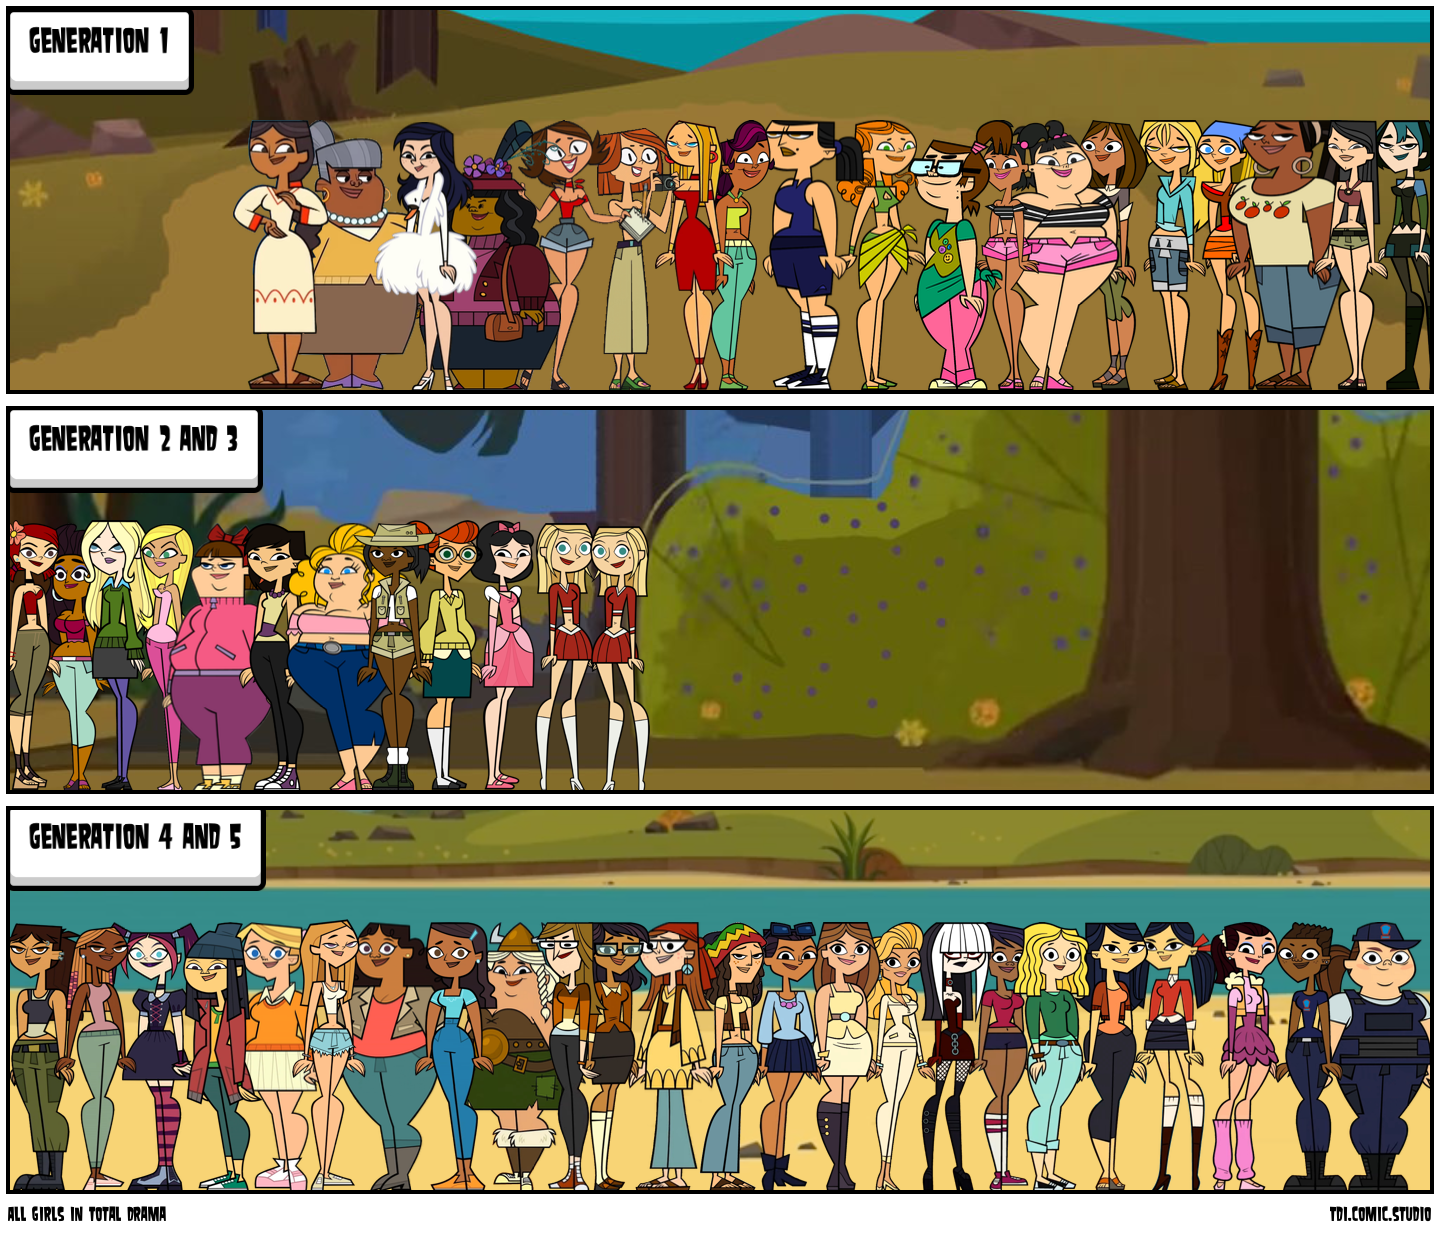 All girls in Total Drama